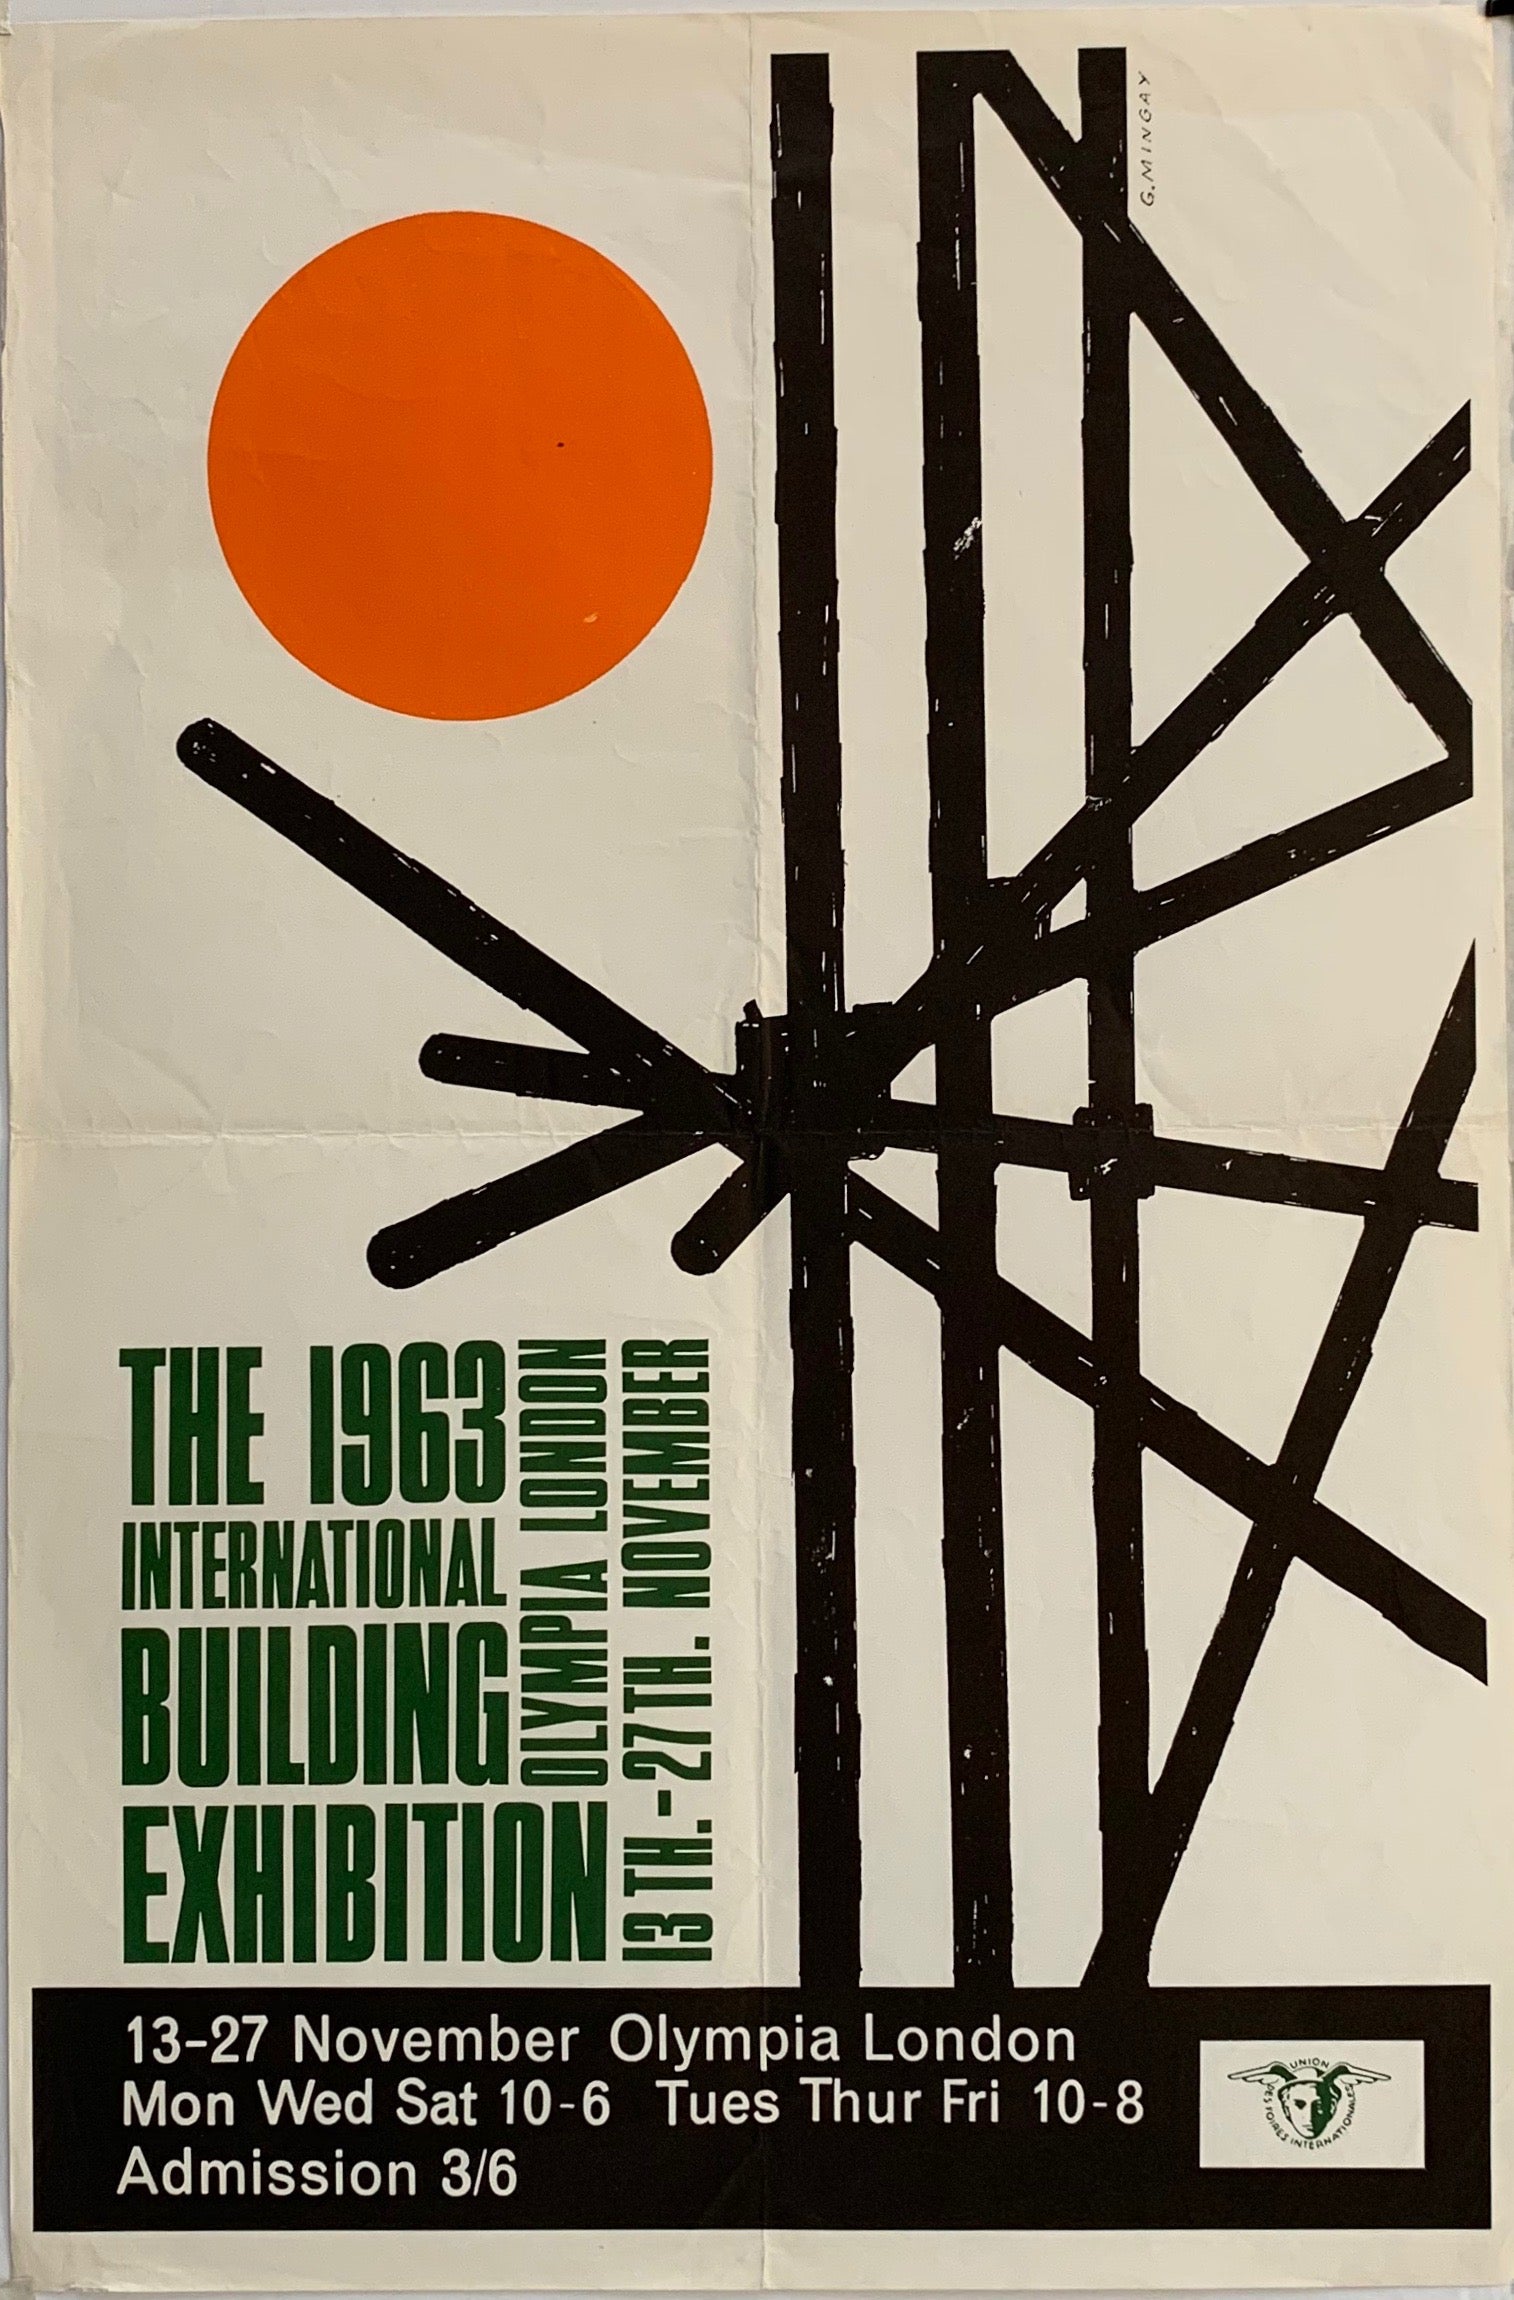 The 1963 International Building Exhibition